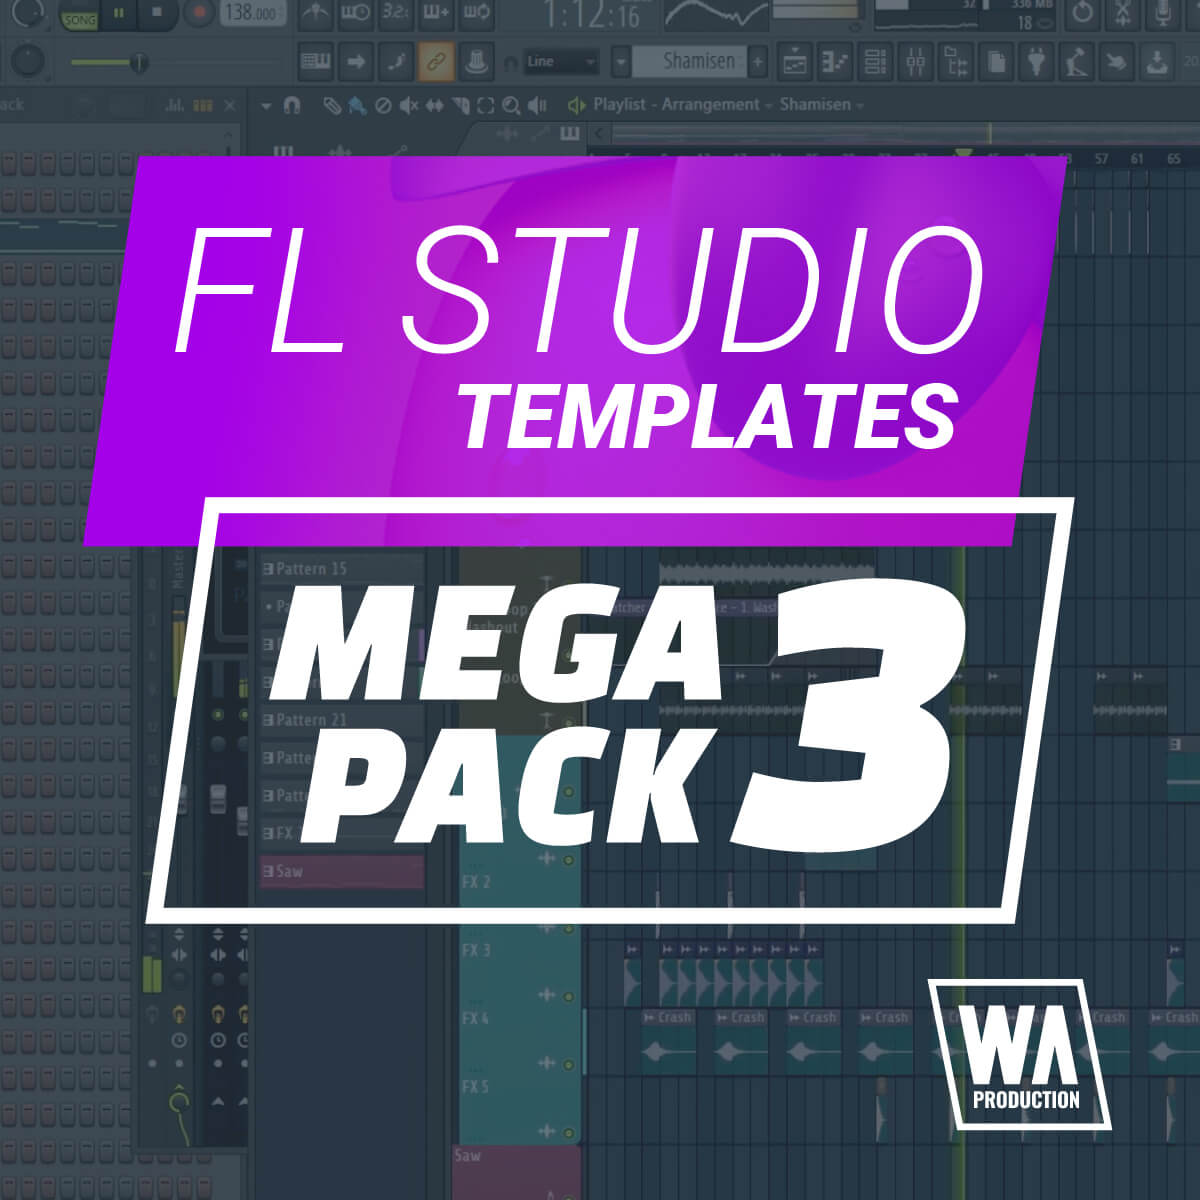 w-a-production-releases-fl-studio-templates-mega-pack-3-with-90